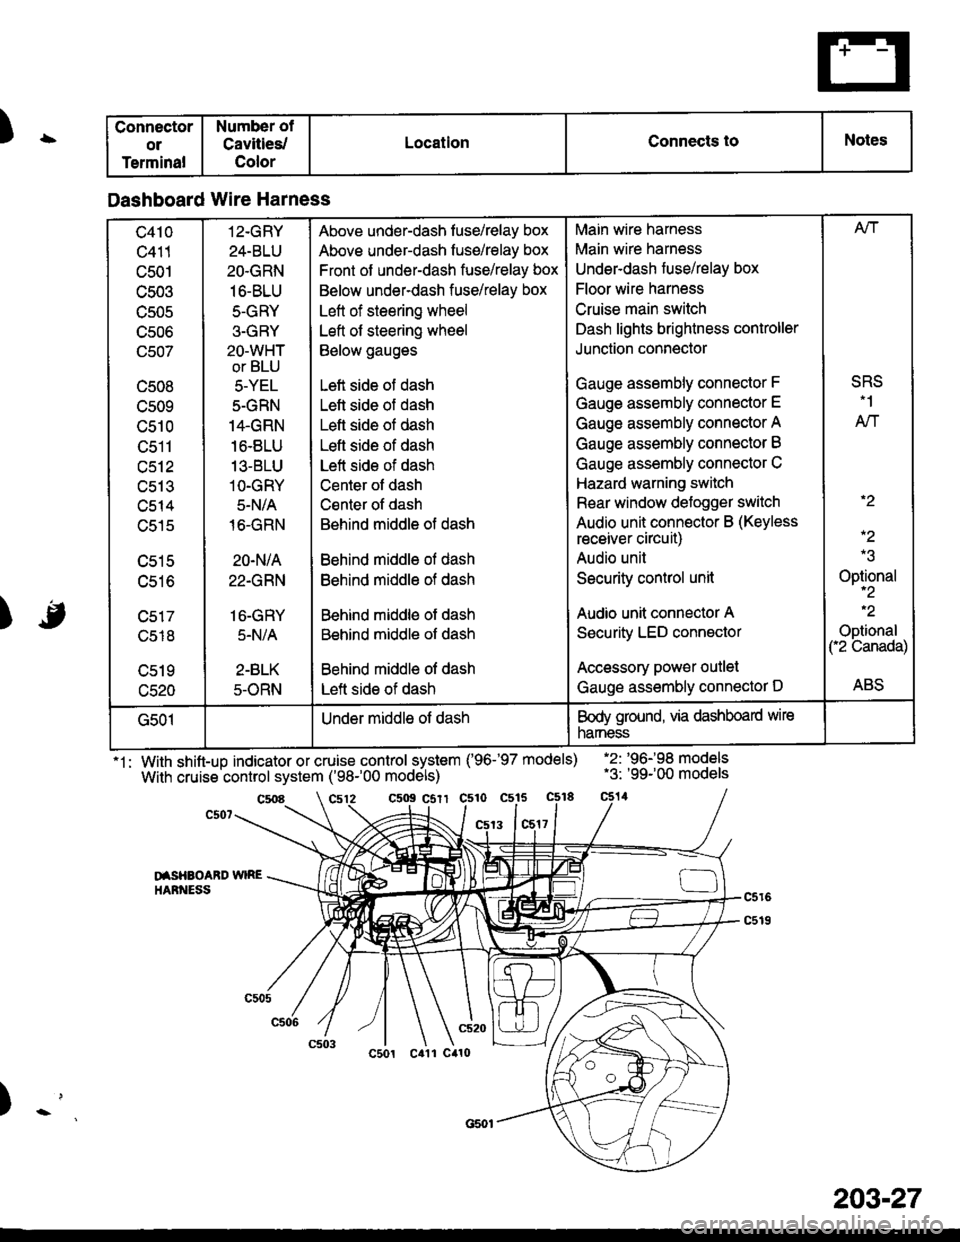 HONDA CIVIC 1997 6.G Workshop Manual )\
) -,
.
1: With shift-up indicator or cruise control system (96-97 models)
With cruise control system (98-00 models)
.2: 96198 models.3: 99-00 models
c5o9 csrr c510 c515
13 1c517
DISHAOABD 